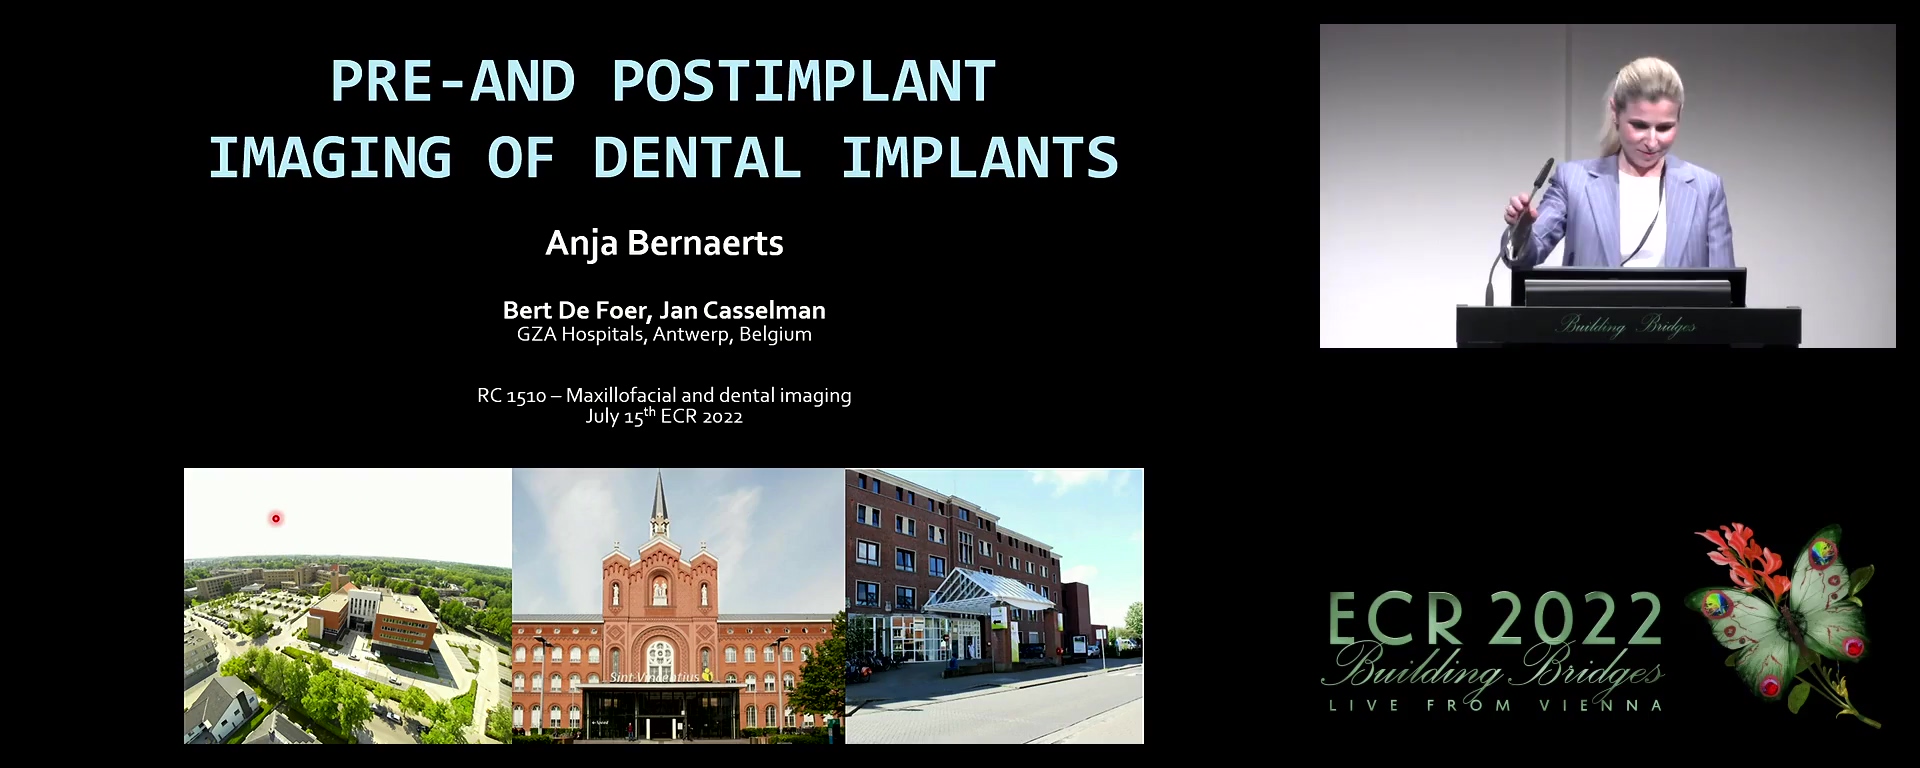 Pre-and postimplant imaging of dental implants